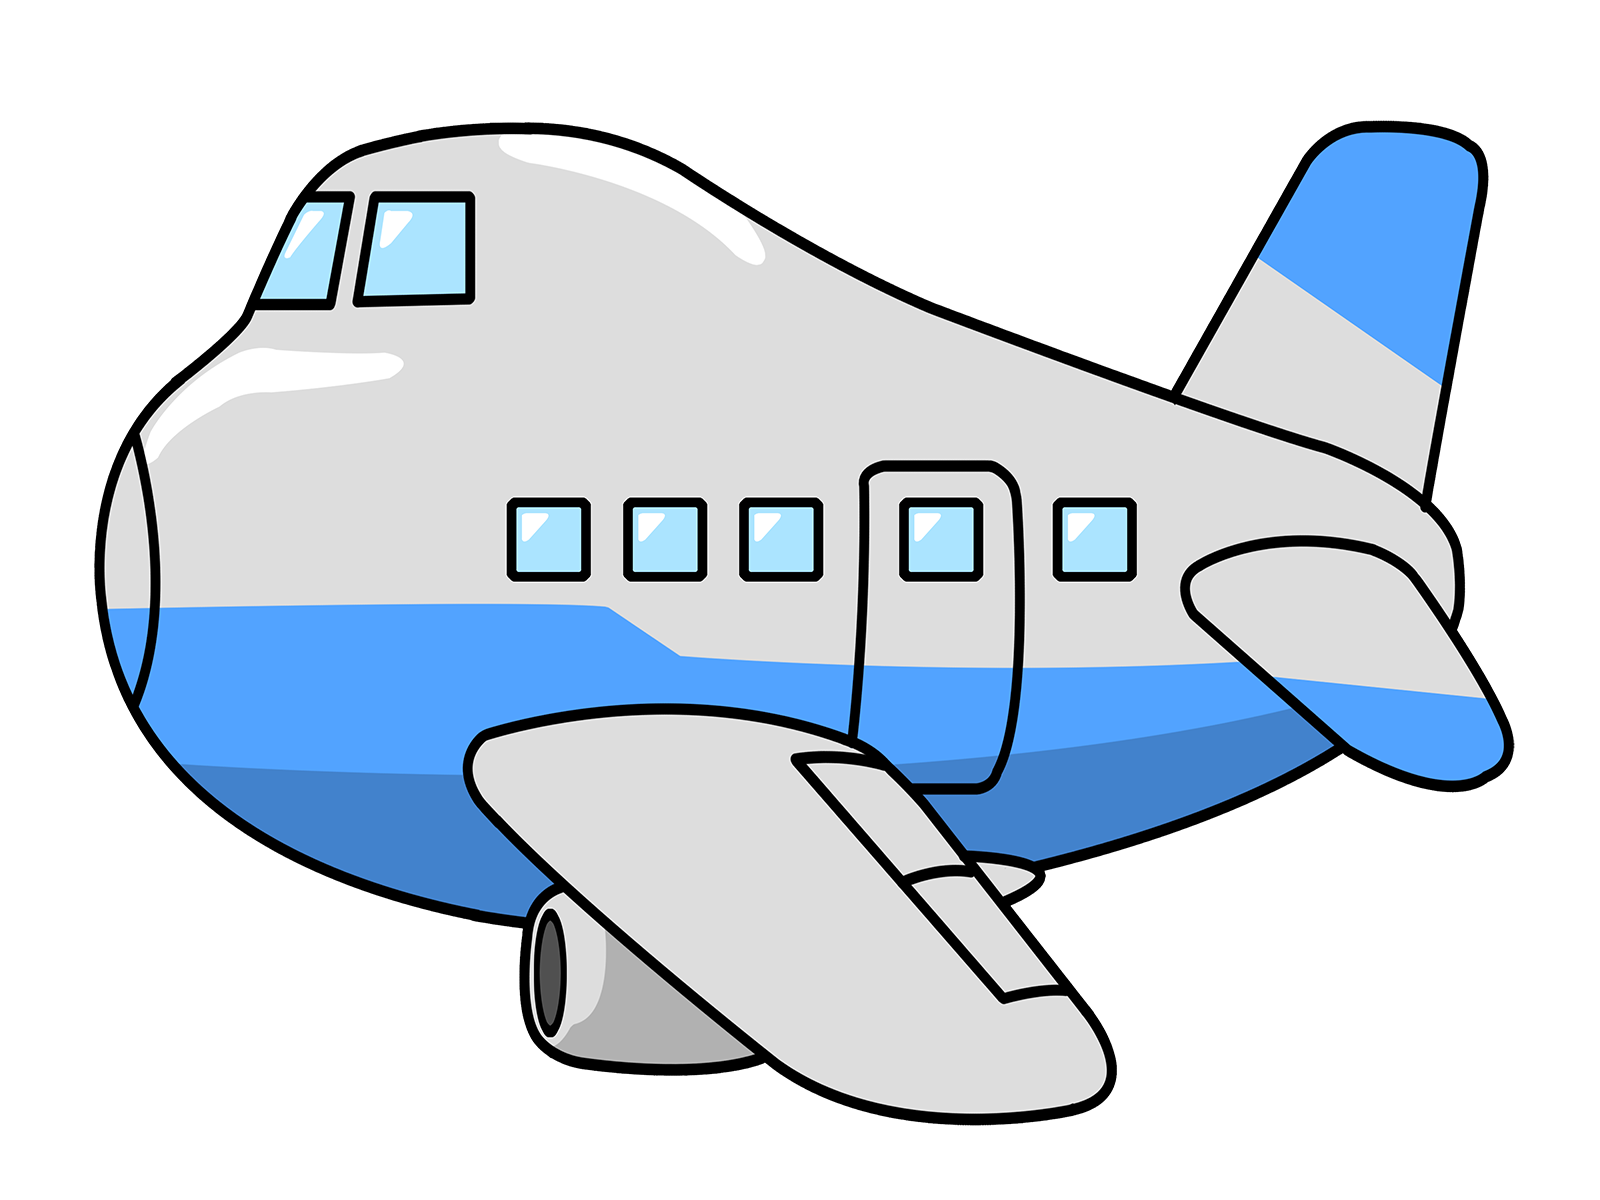 free clipart images of planes